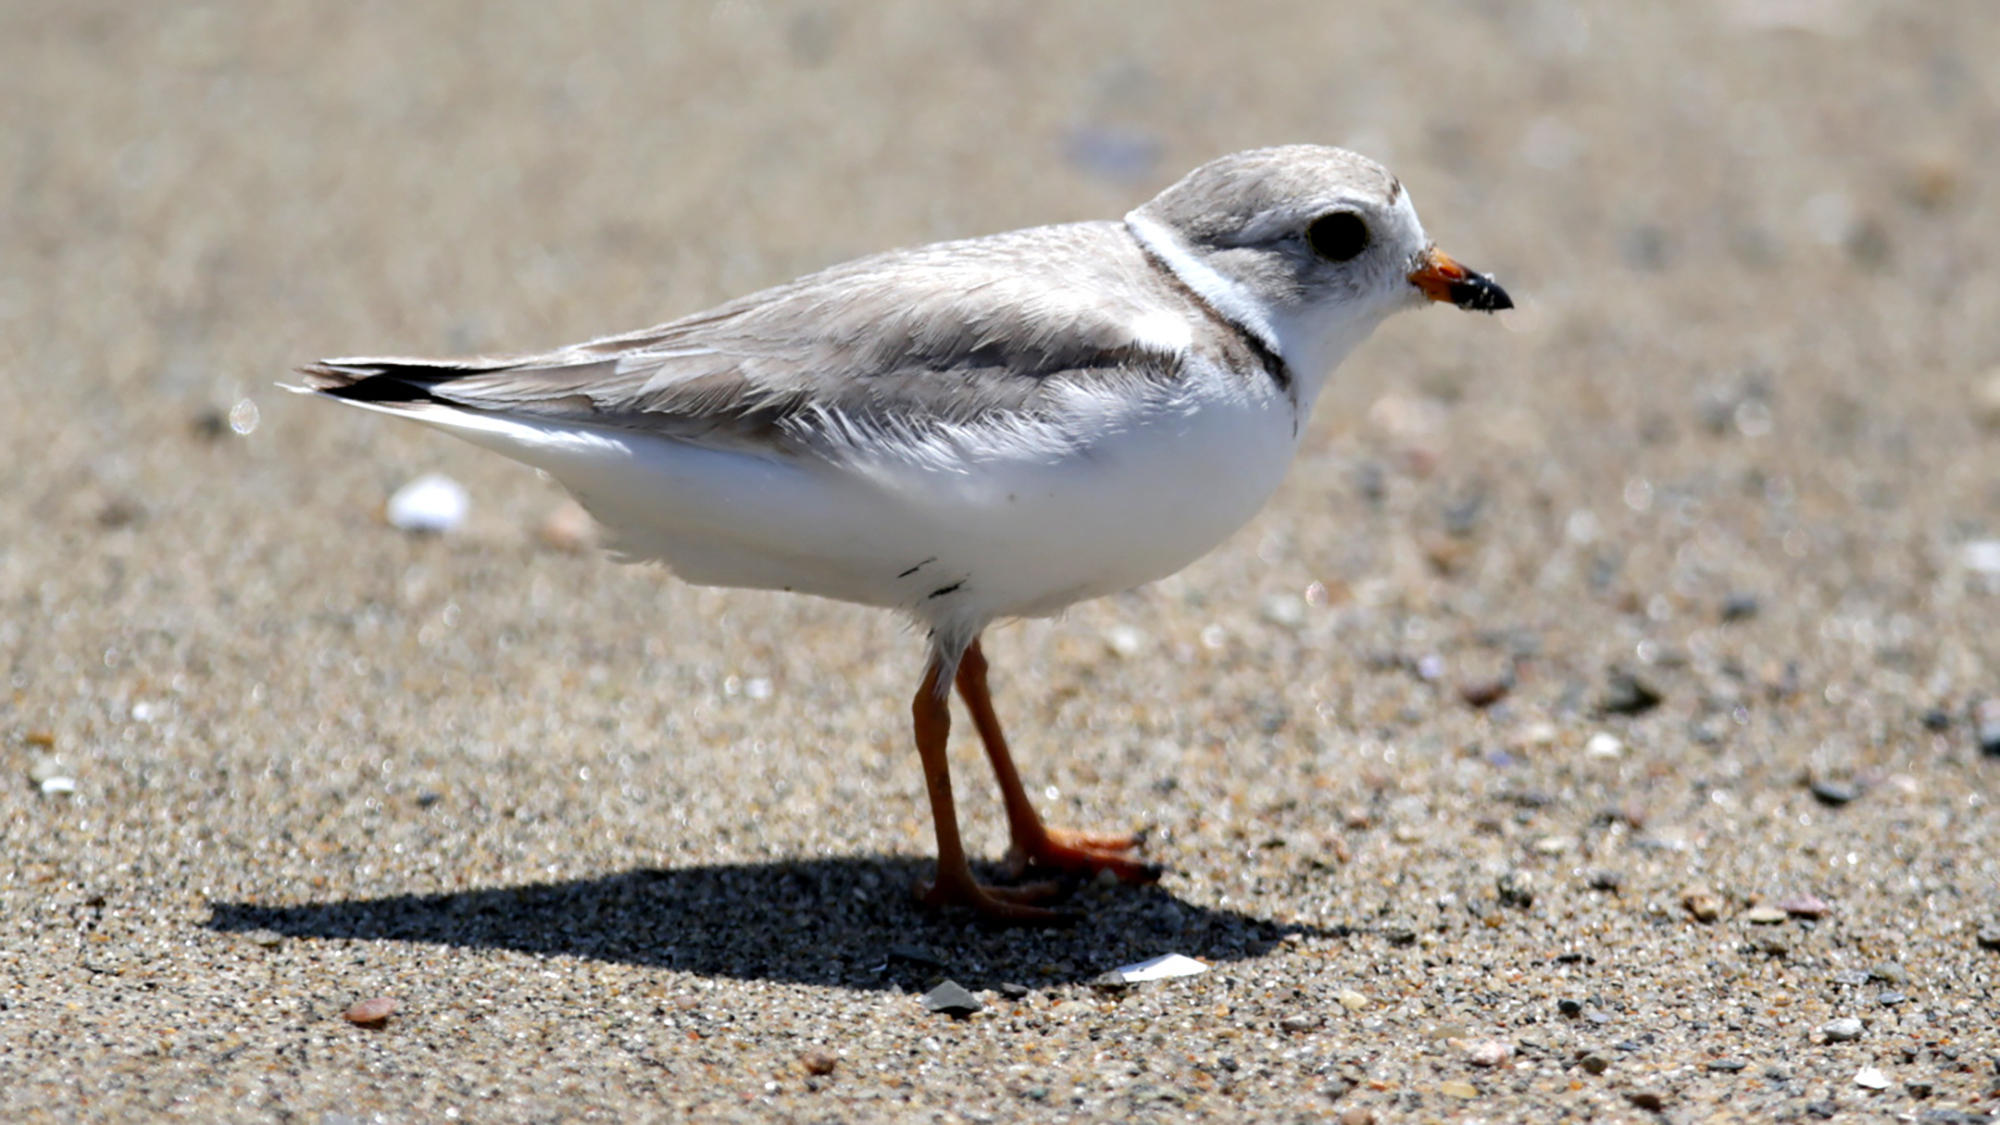 Piping plovers are in trouble, but there’s some good news